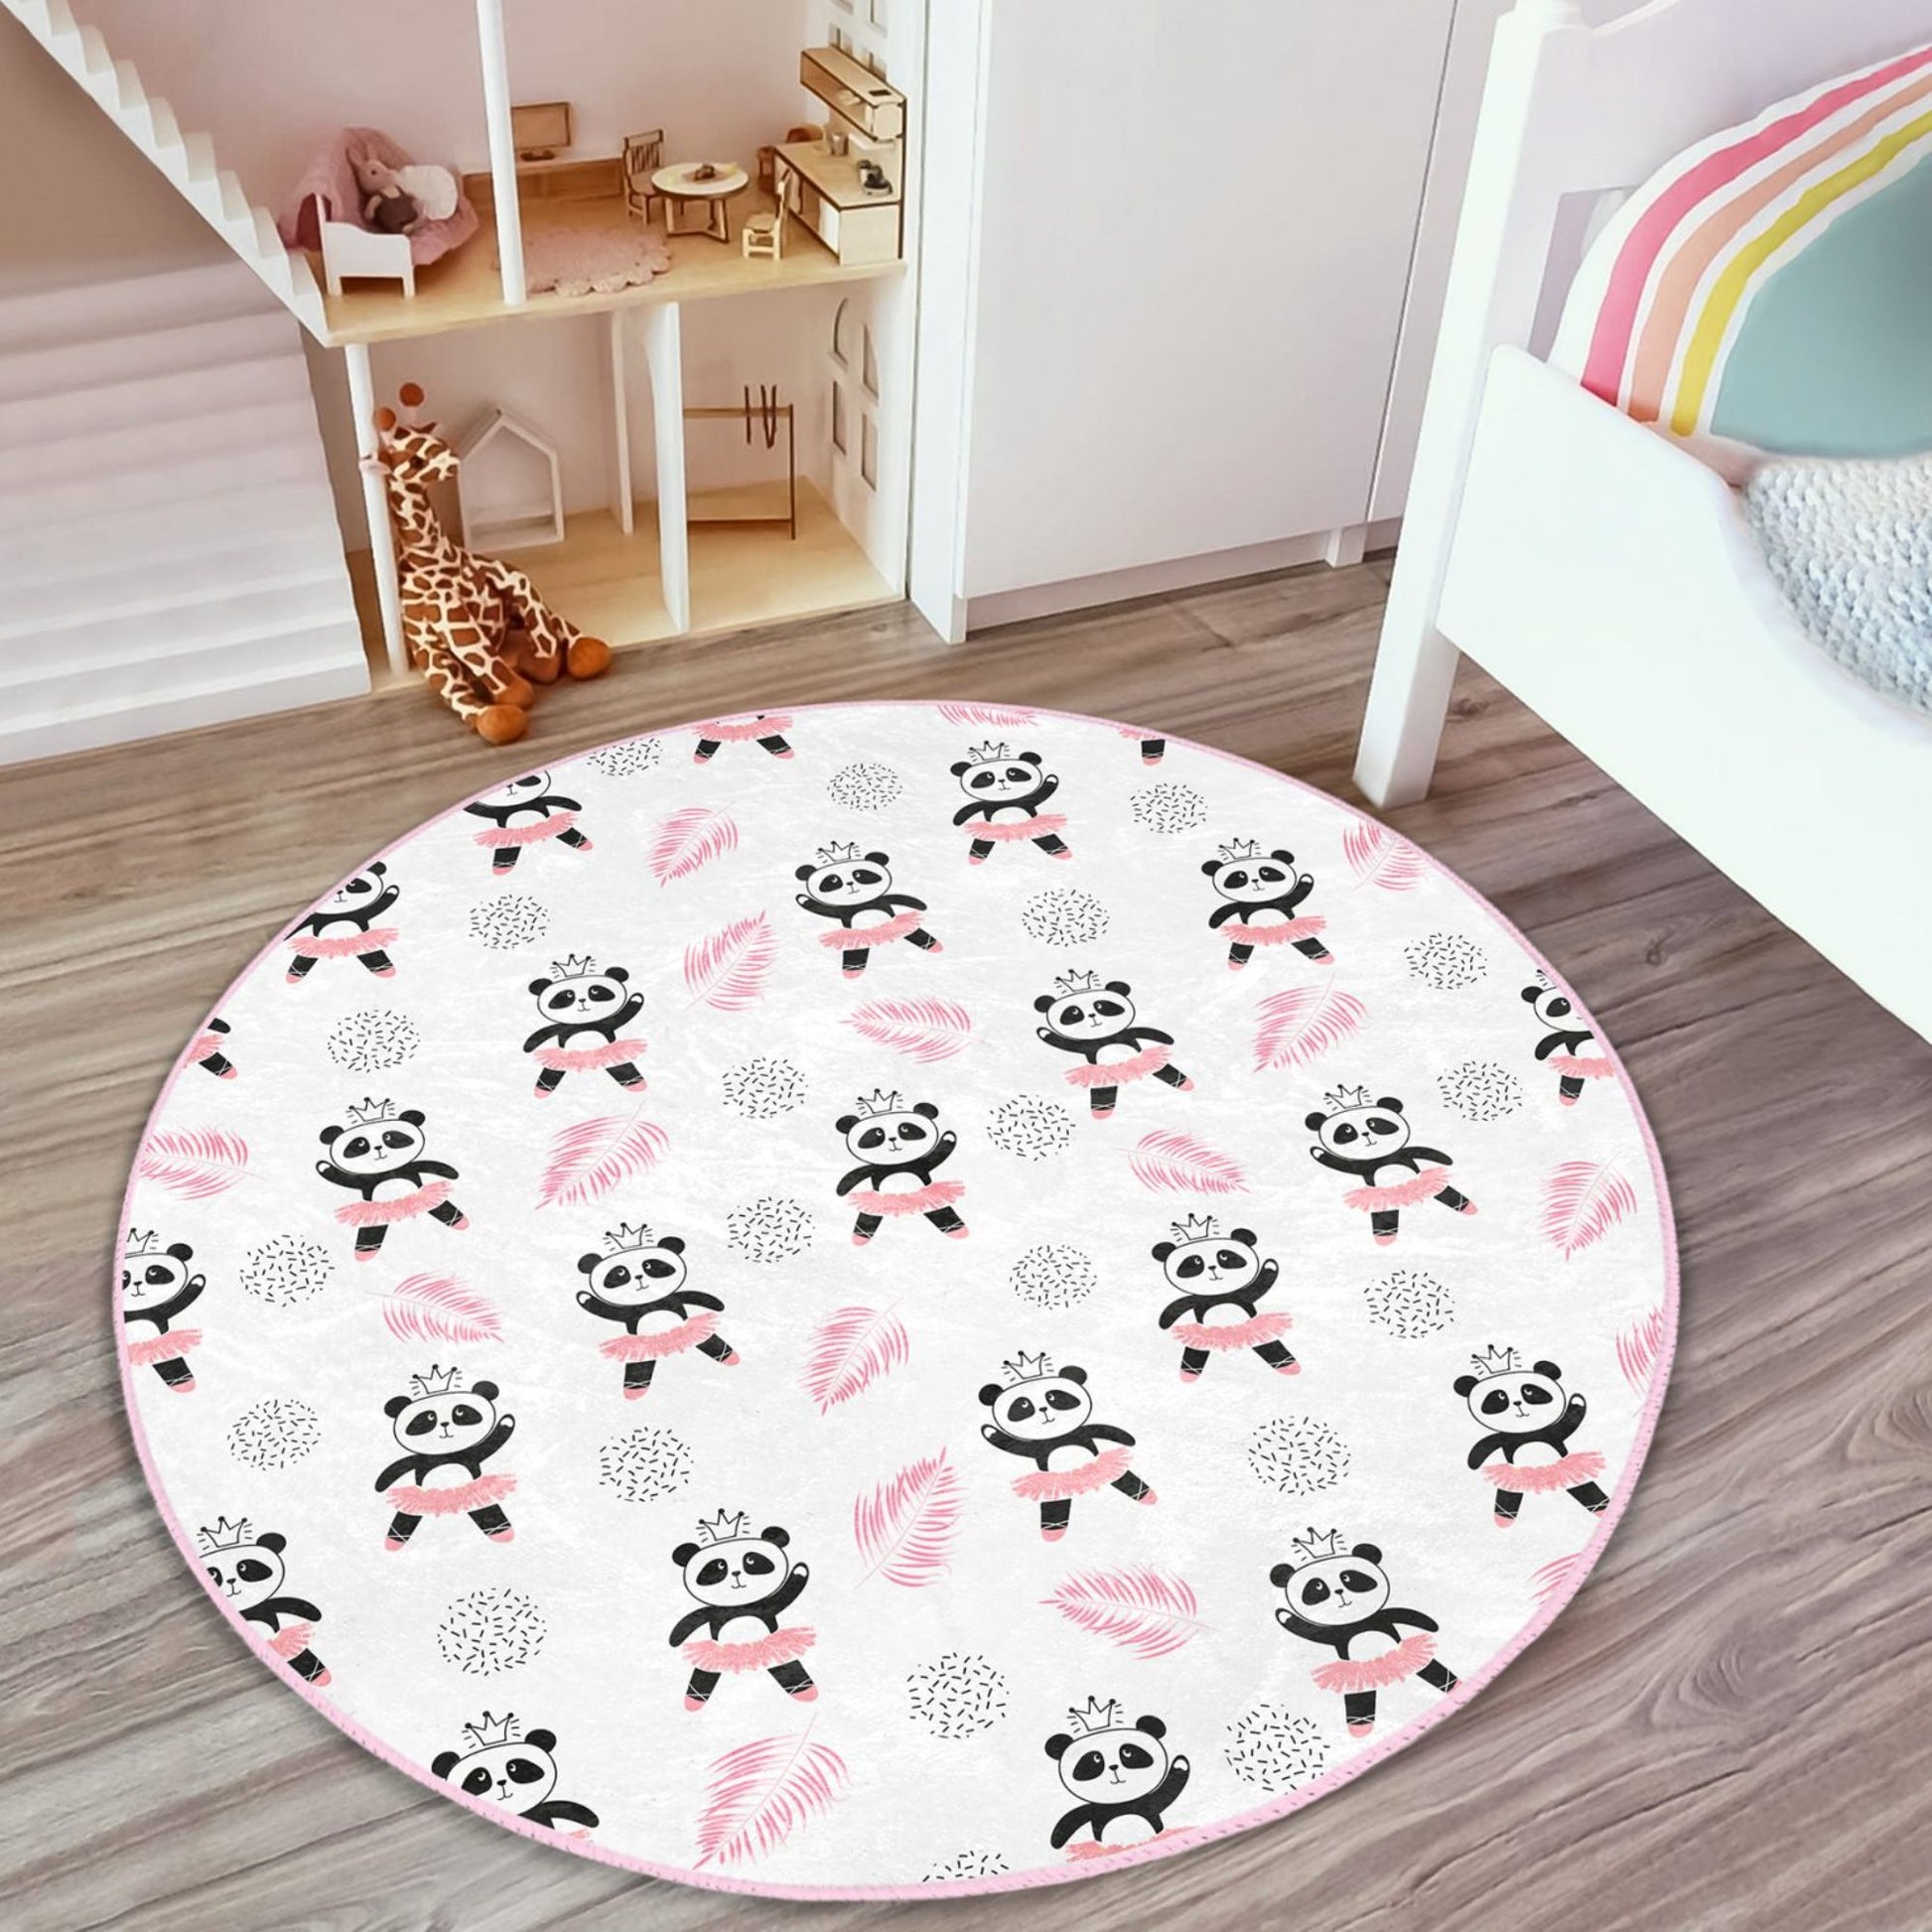 Homeezone Kids Rug - Add a Royal Touch to Your Child's Room